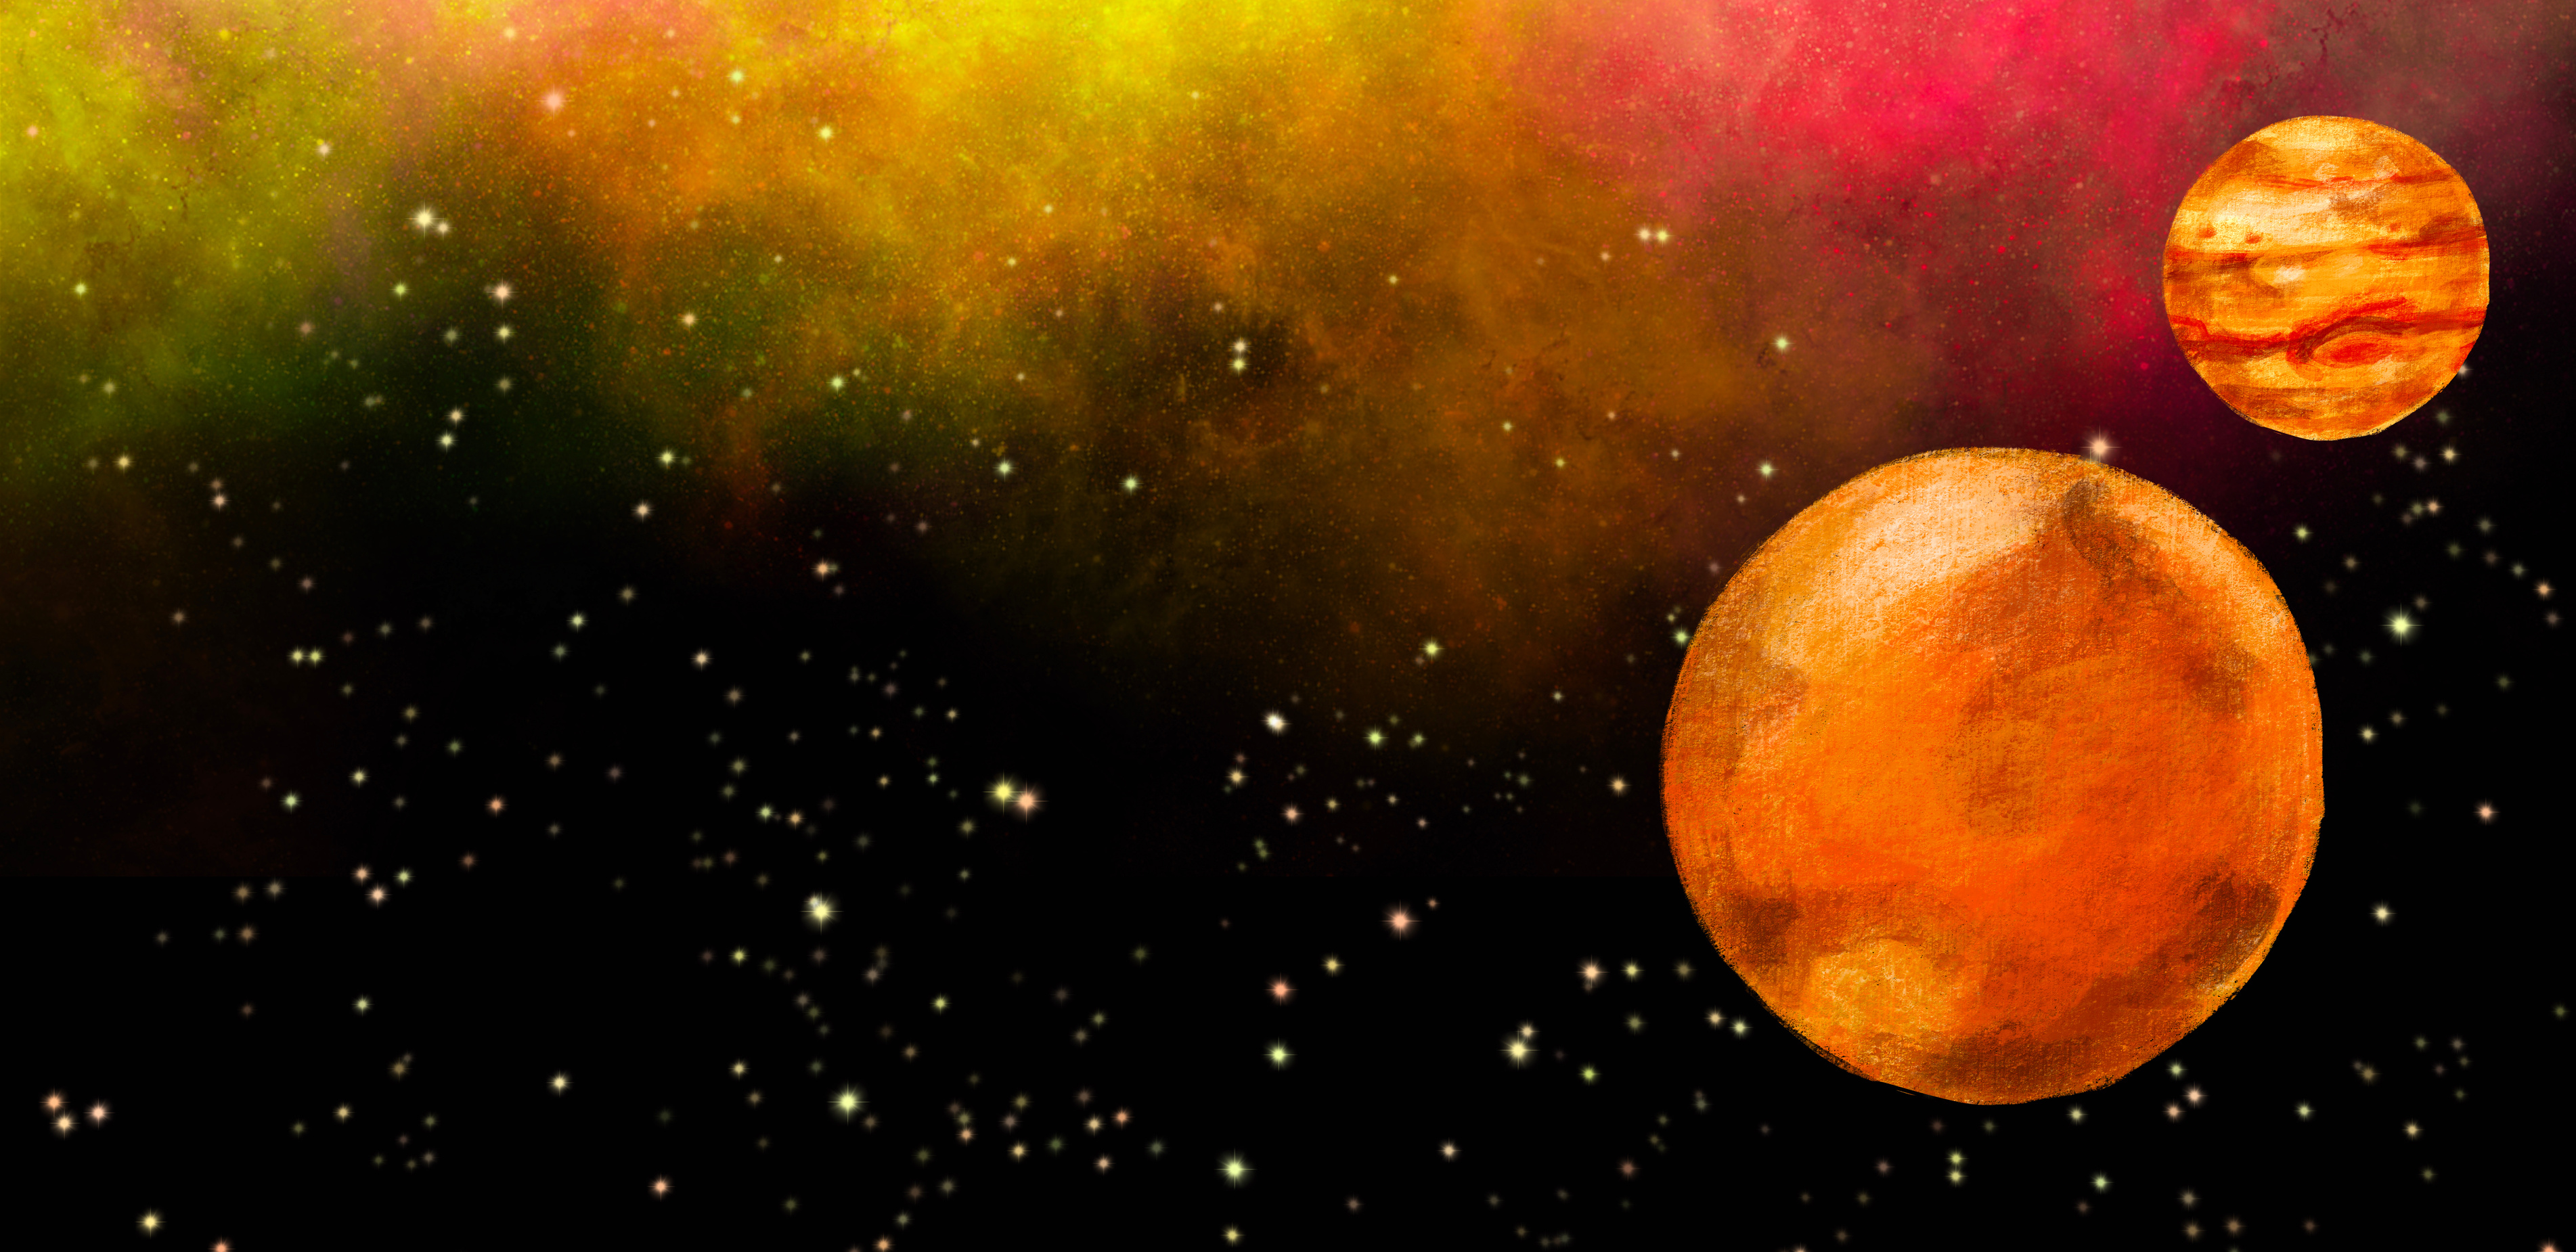 Two Orange Planets in the Universe